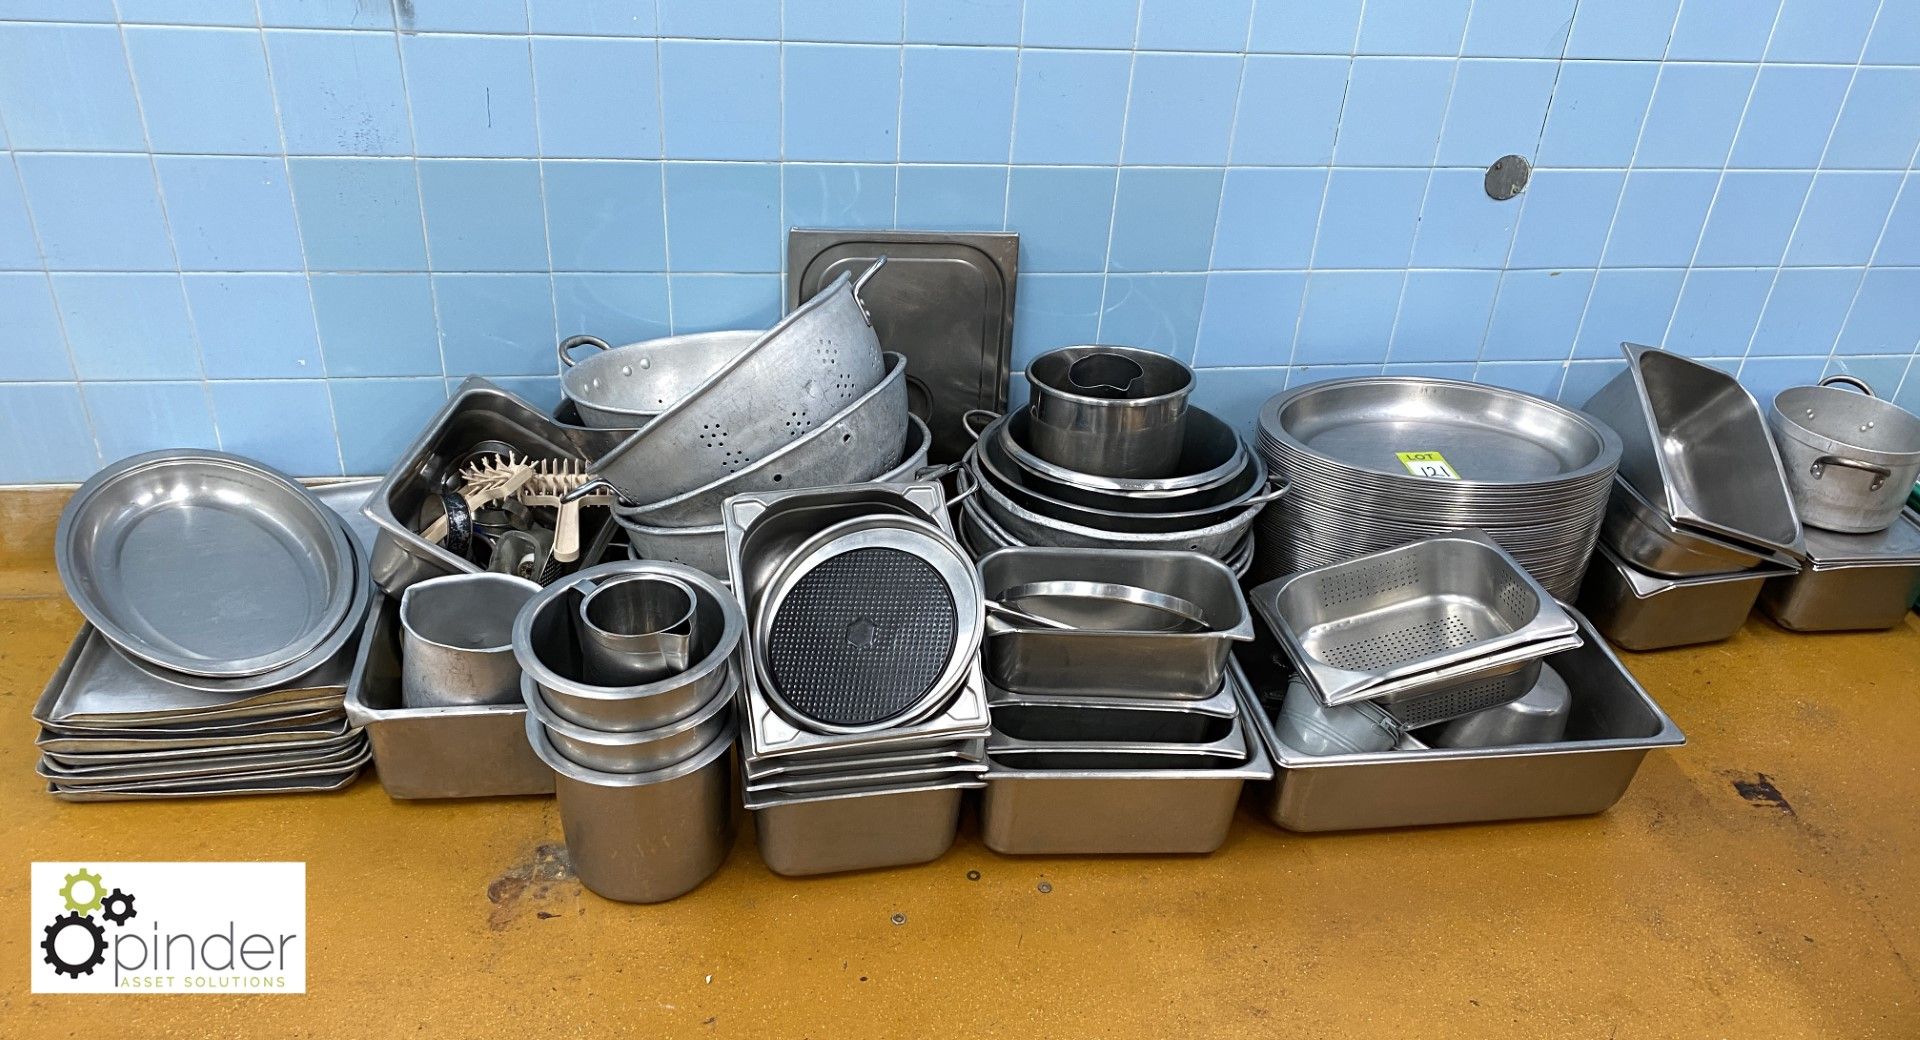 Large quantity Serving Trays, Colanders, Jugs, etc (located in Pot Wash Room, Basement) ****